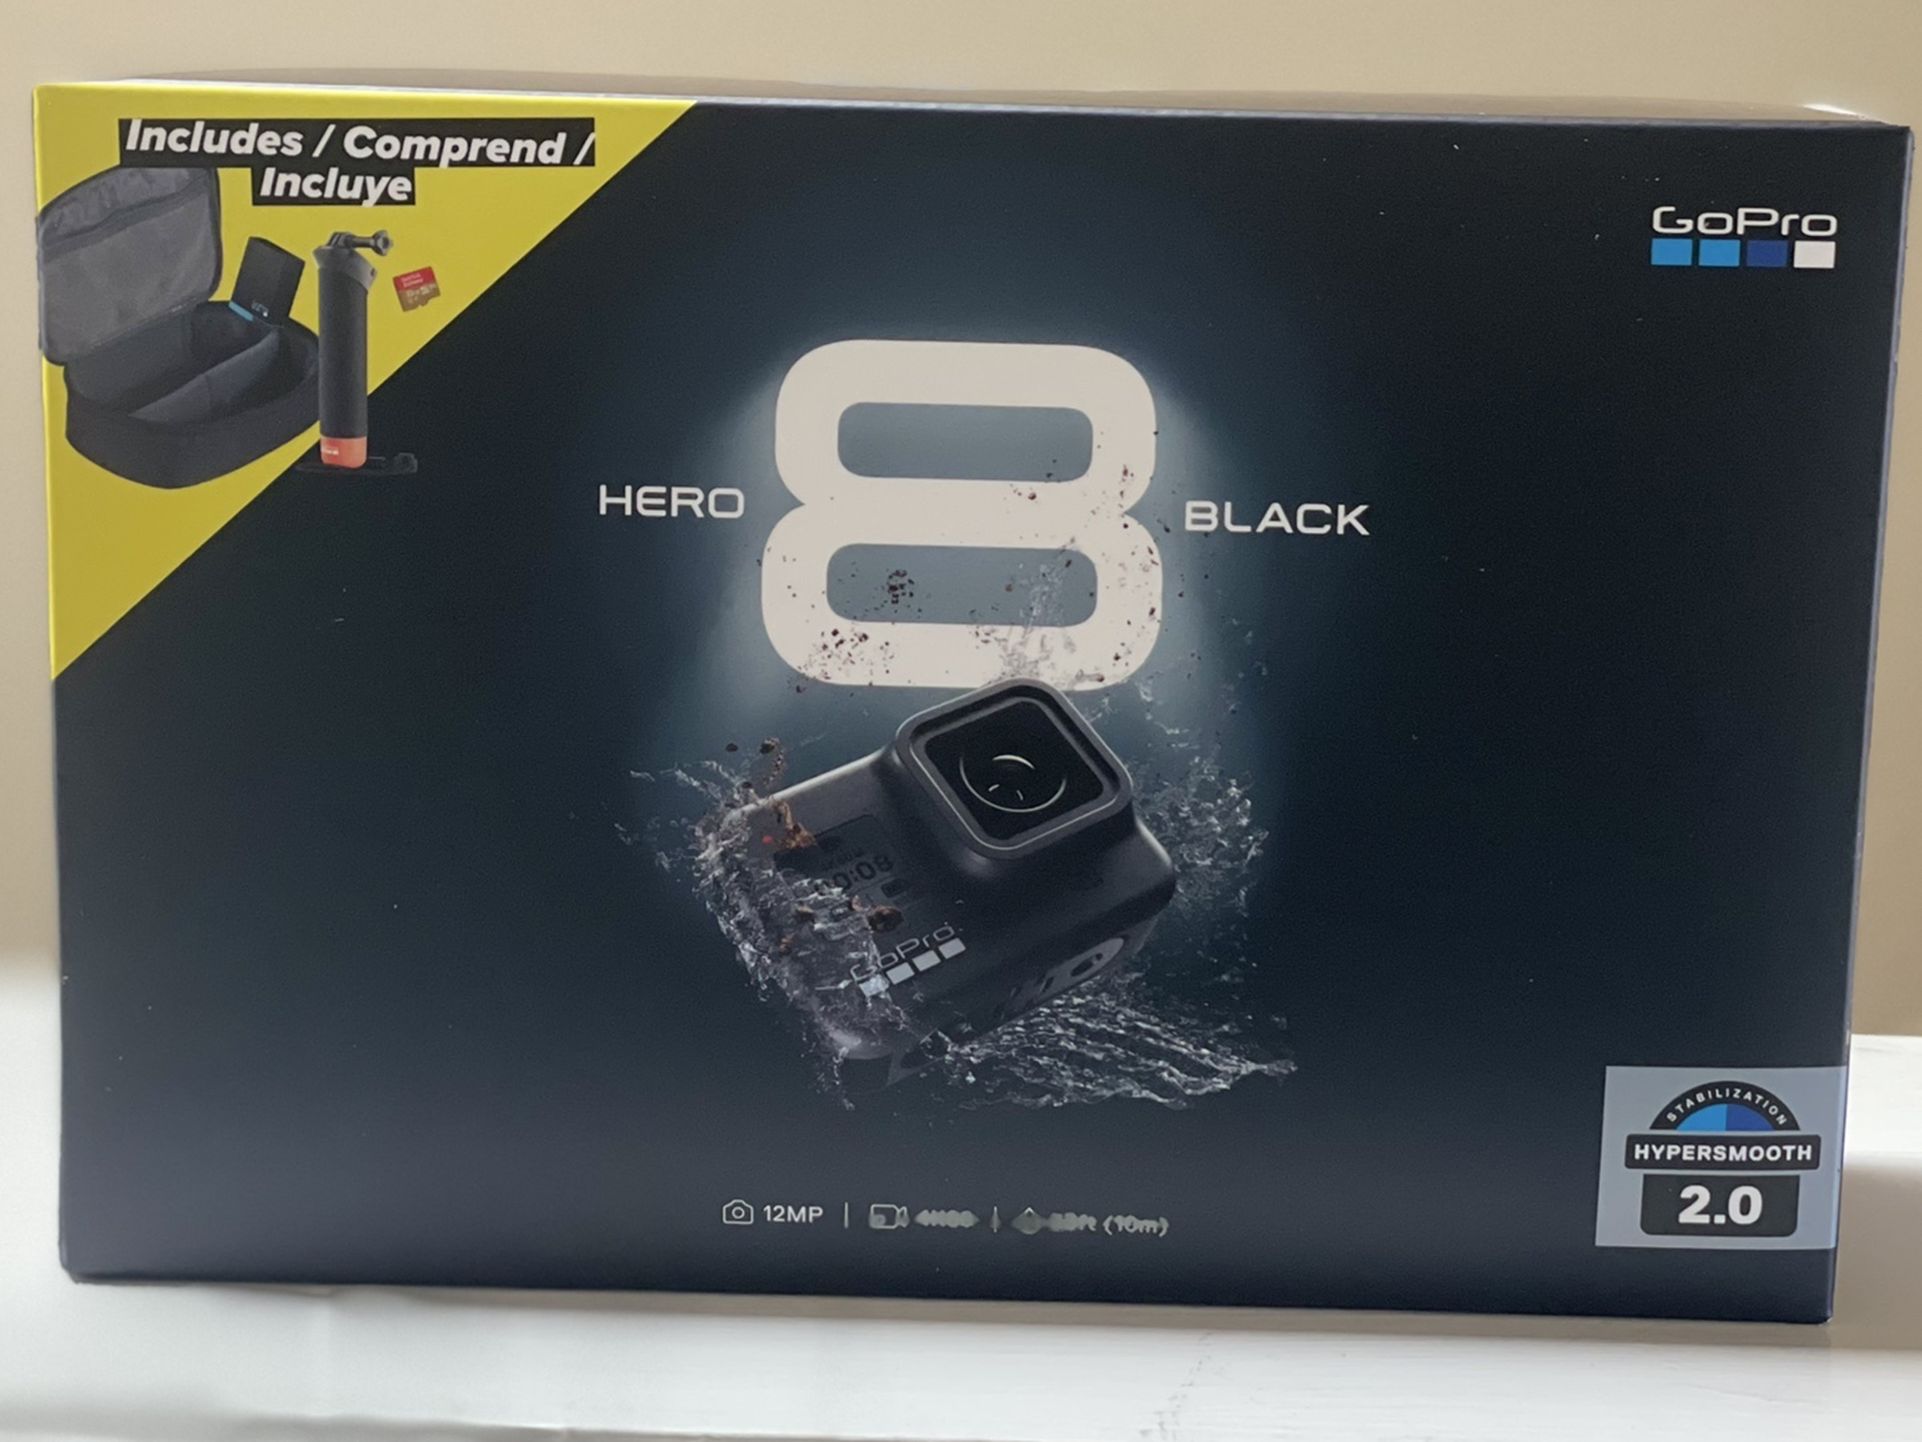 GoPro Hero 8 with Accessories